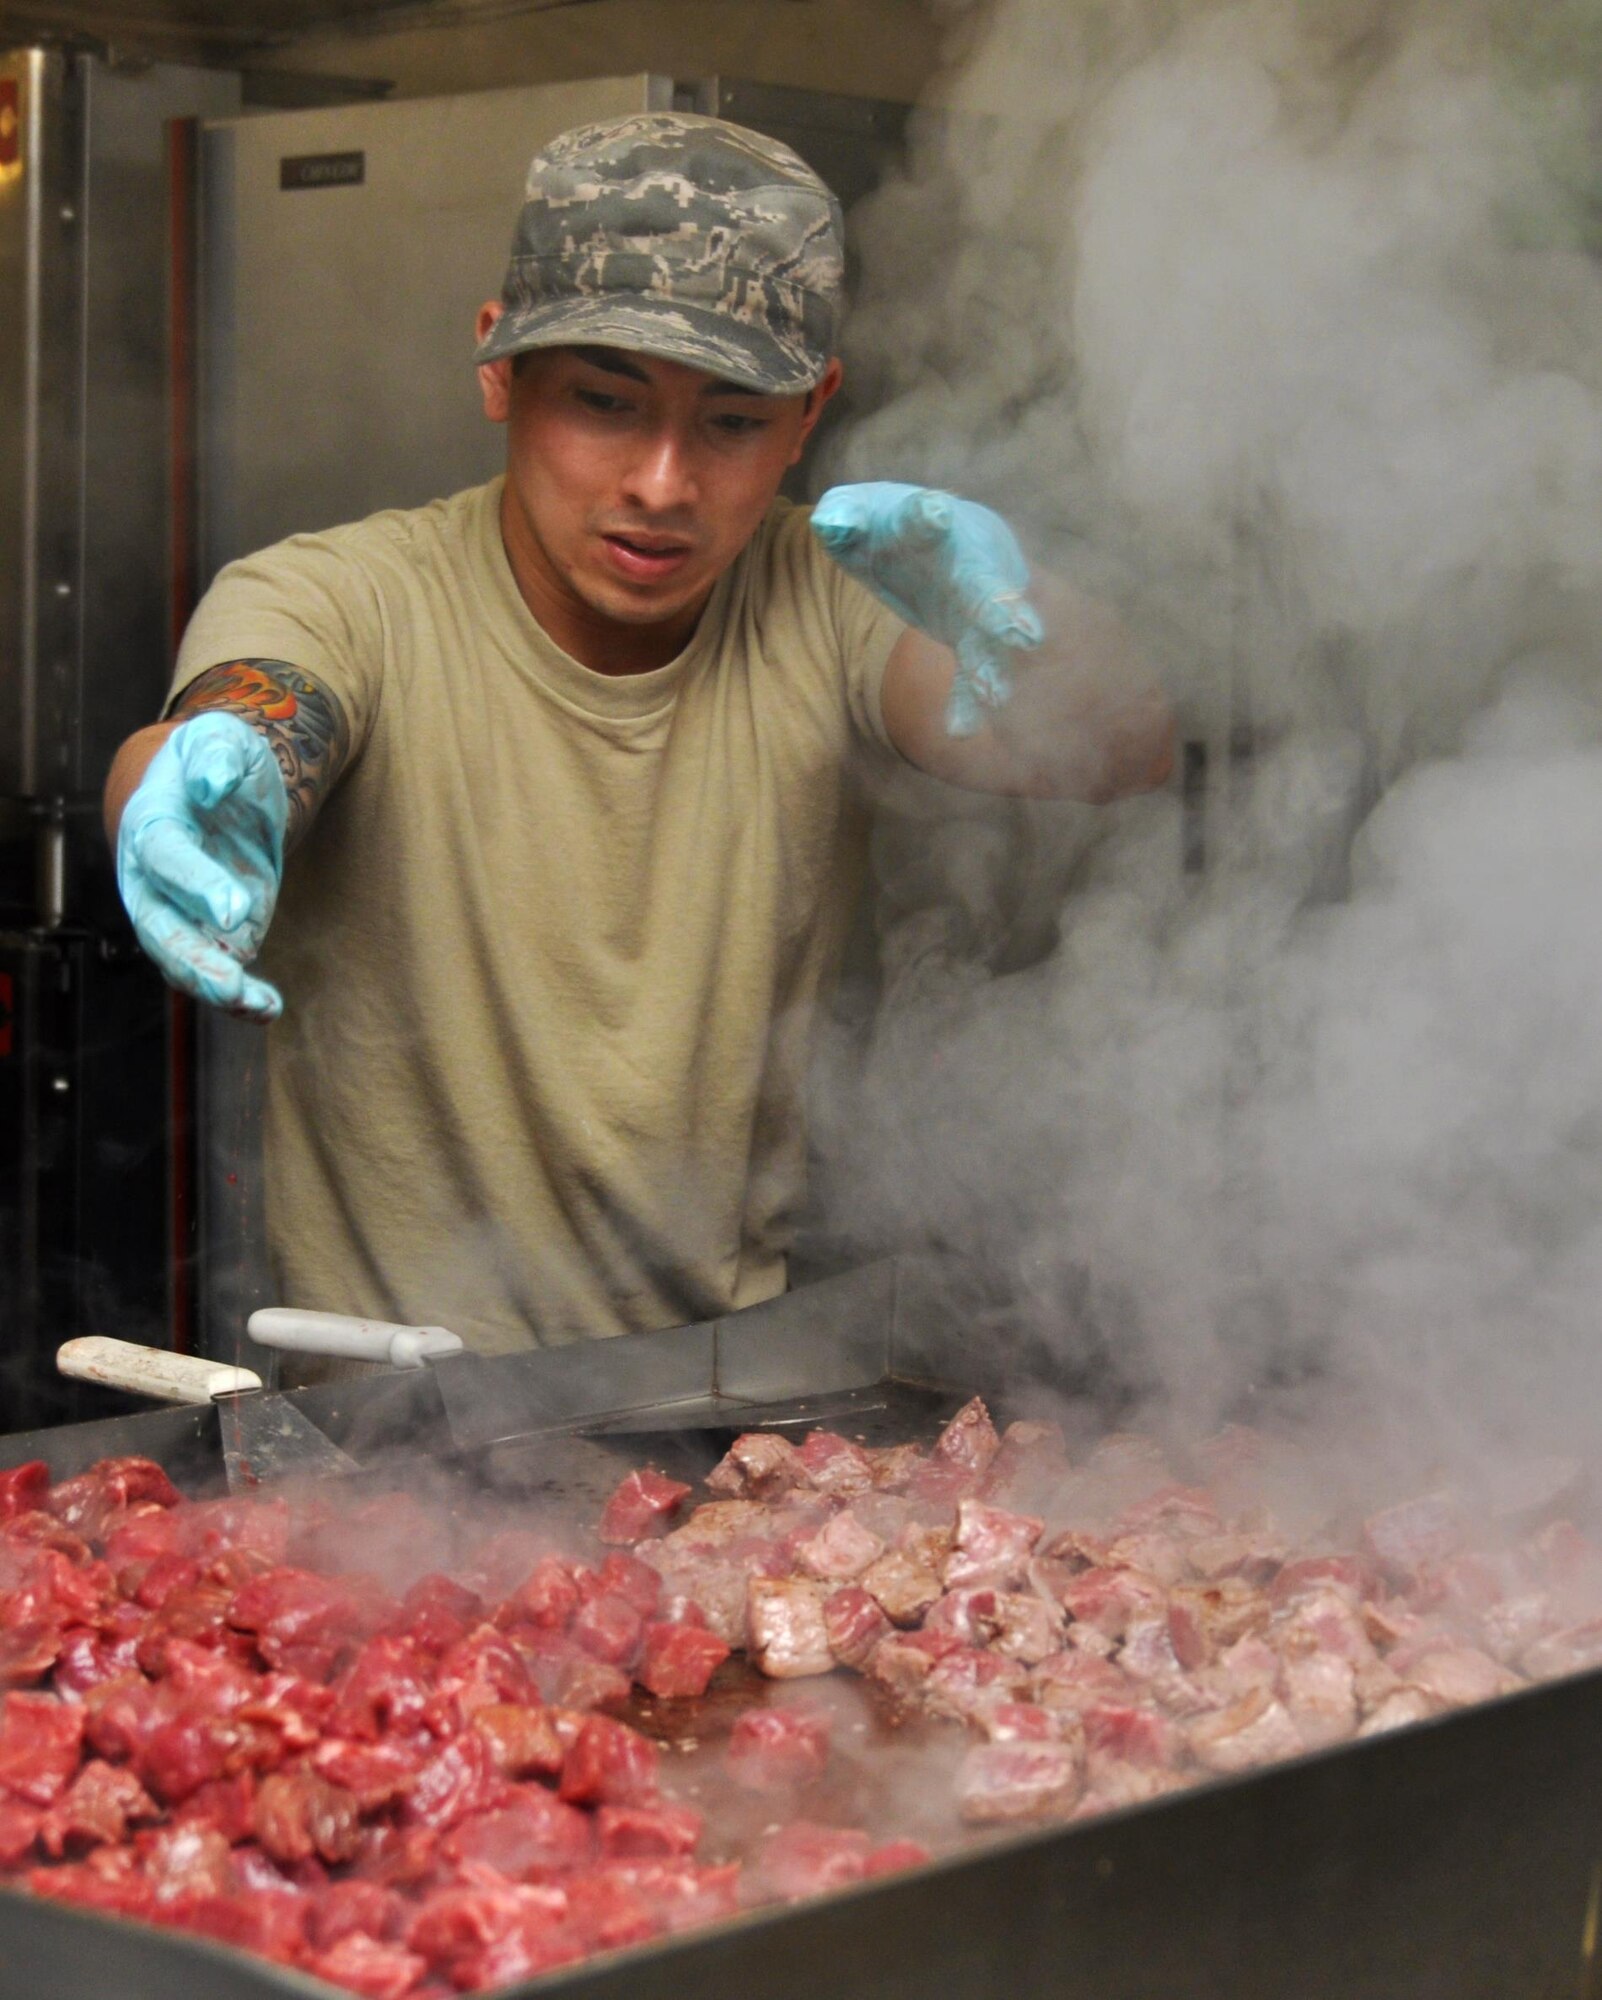 Senior Airman Fa Pham, 911th Force Support Squadron, Pittsburgh, Pa., throws beef on the grill to make Hungarian Beef during the Readiness Challenge for Force Support Silver Flag at Dobbins Air Reserve Base, Georgia, March 11, 2015. The challenge consisted of teams competing against each other in nine different events ranging from following a convoy, building tents, fixing Babington burners, cooking meals, planning lodging, planning a base from scratch, driving a forklift and a scavenger hunt.  (U.S. Air Force photo/Senior Airman Daniel Phelps)